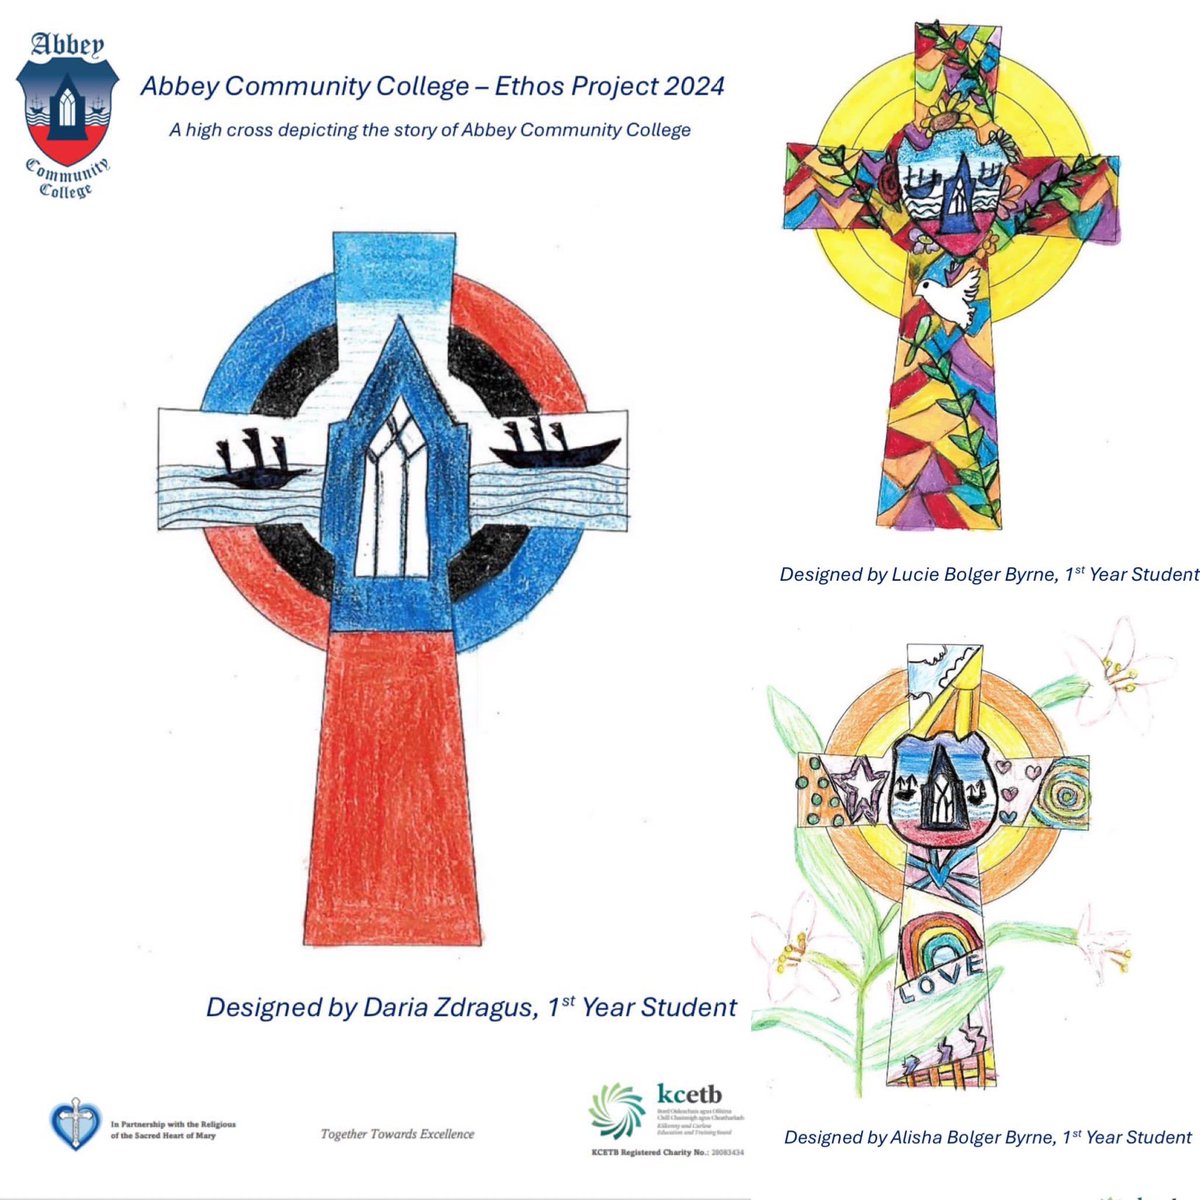 As part of this year’s Ethos Project, we asked students to design a High Cross depicting the story of Abbey Community College. Congratulations to our winners who were awarded their prizes today for their designs. Such talent! @KCETB_Schools @ETBIreland #togethertowardsexcellence